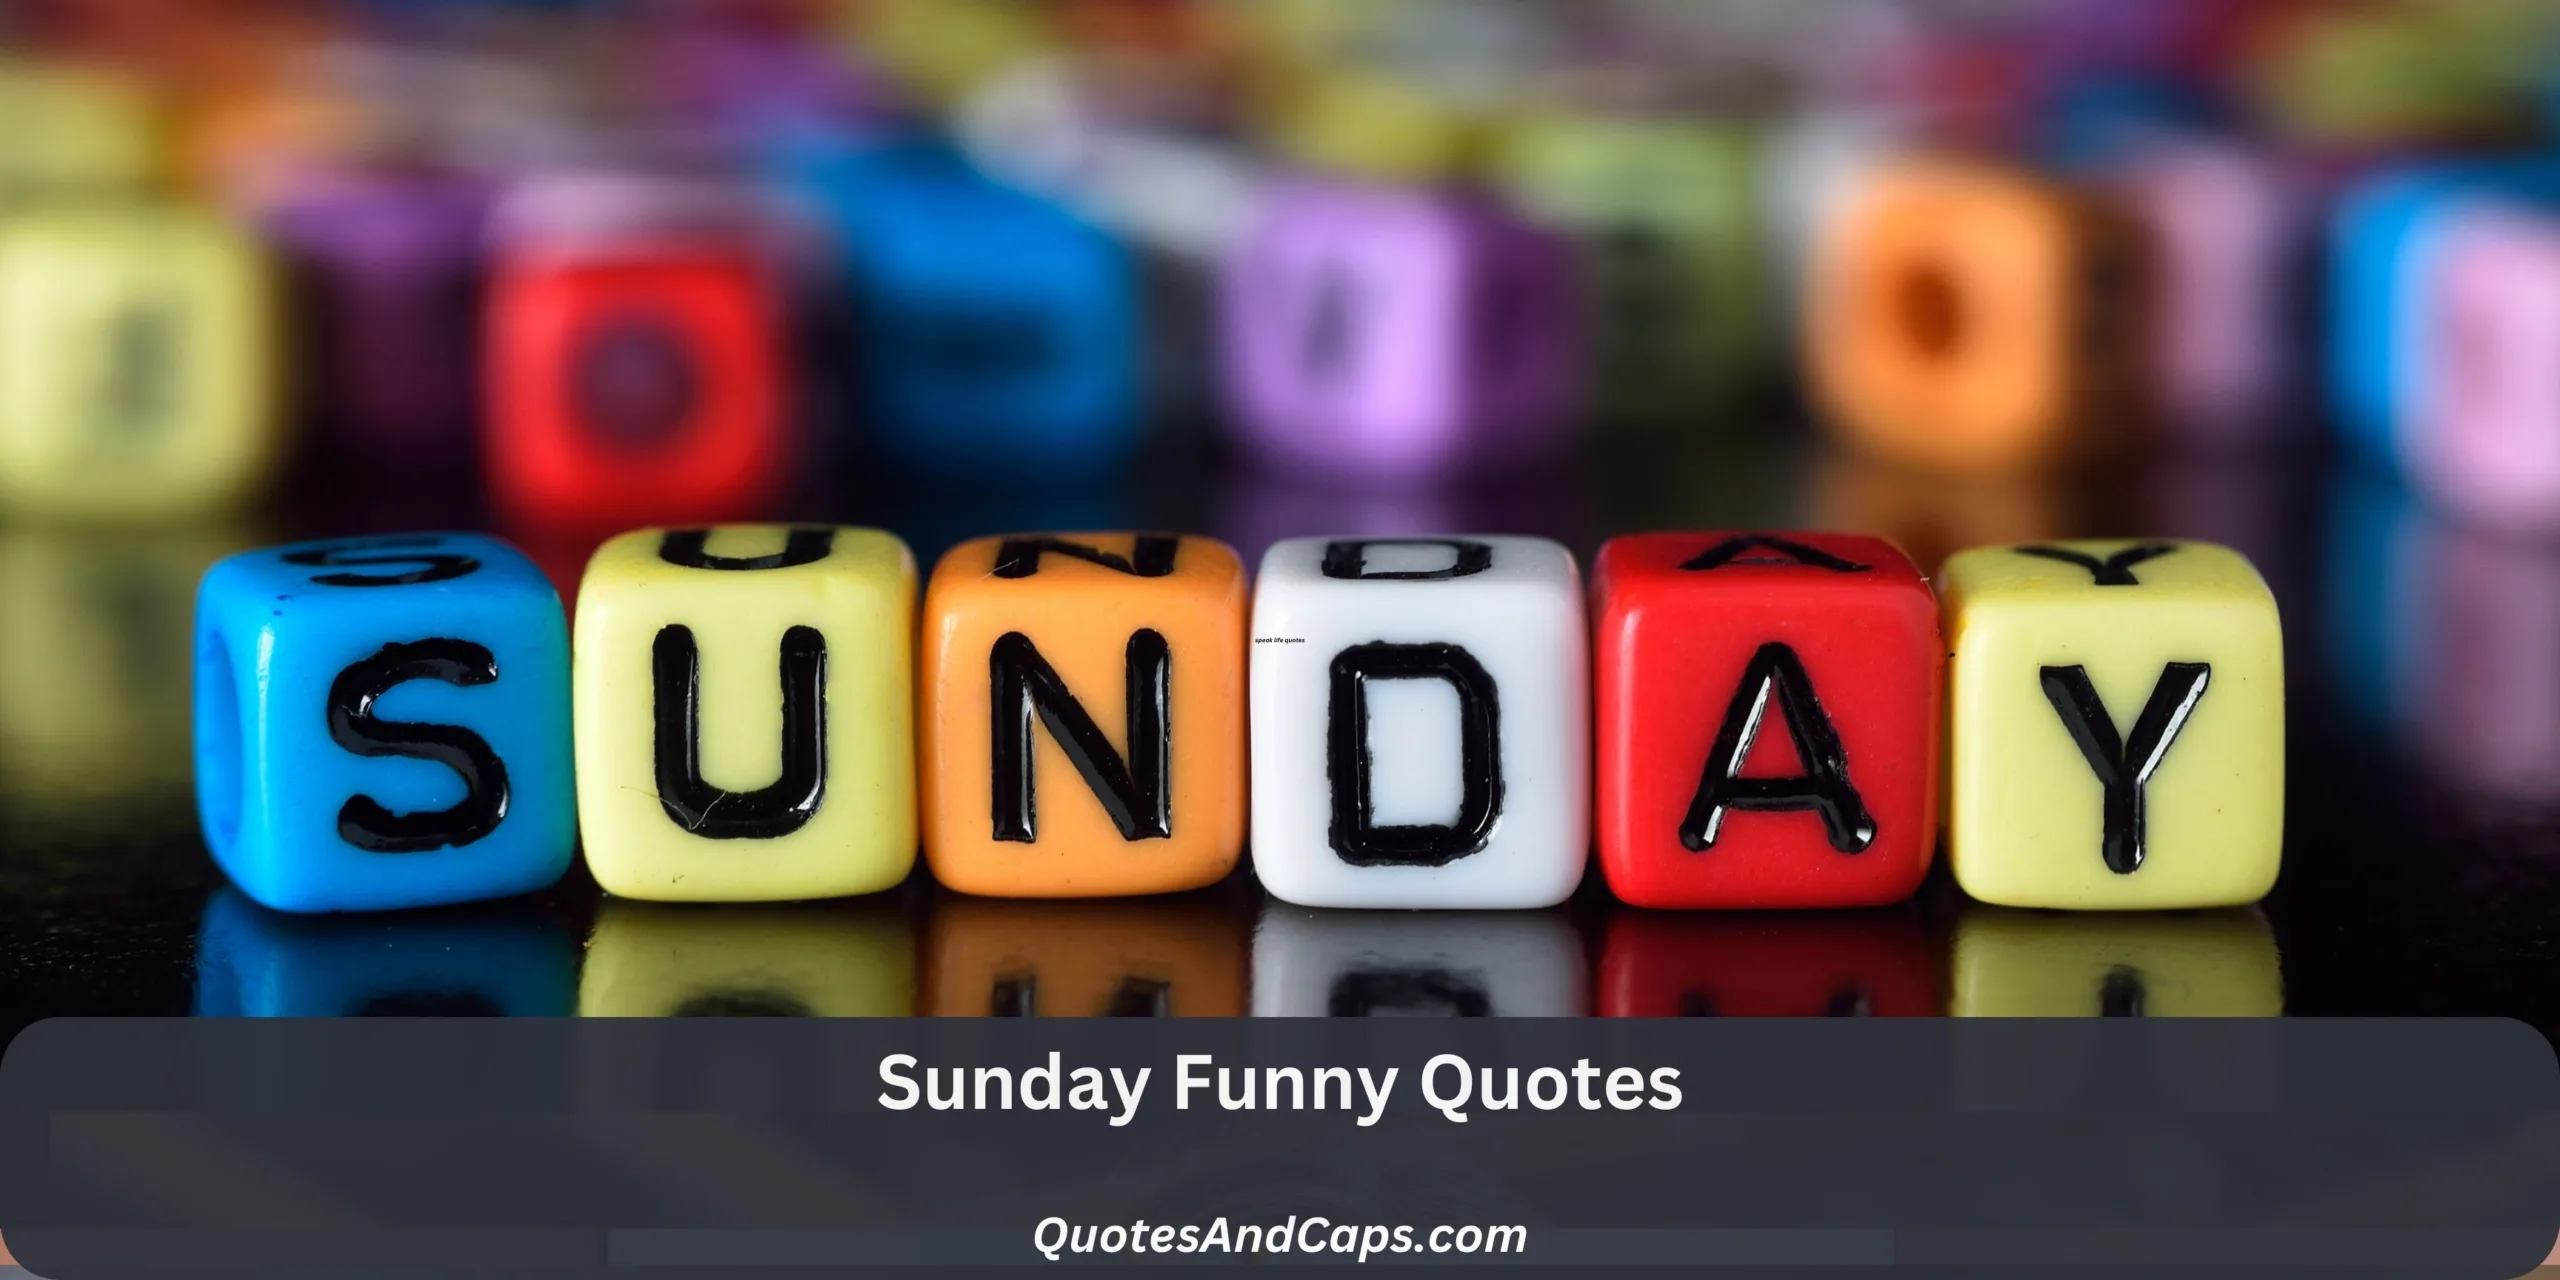 Sunday Funny Quotes